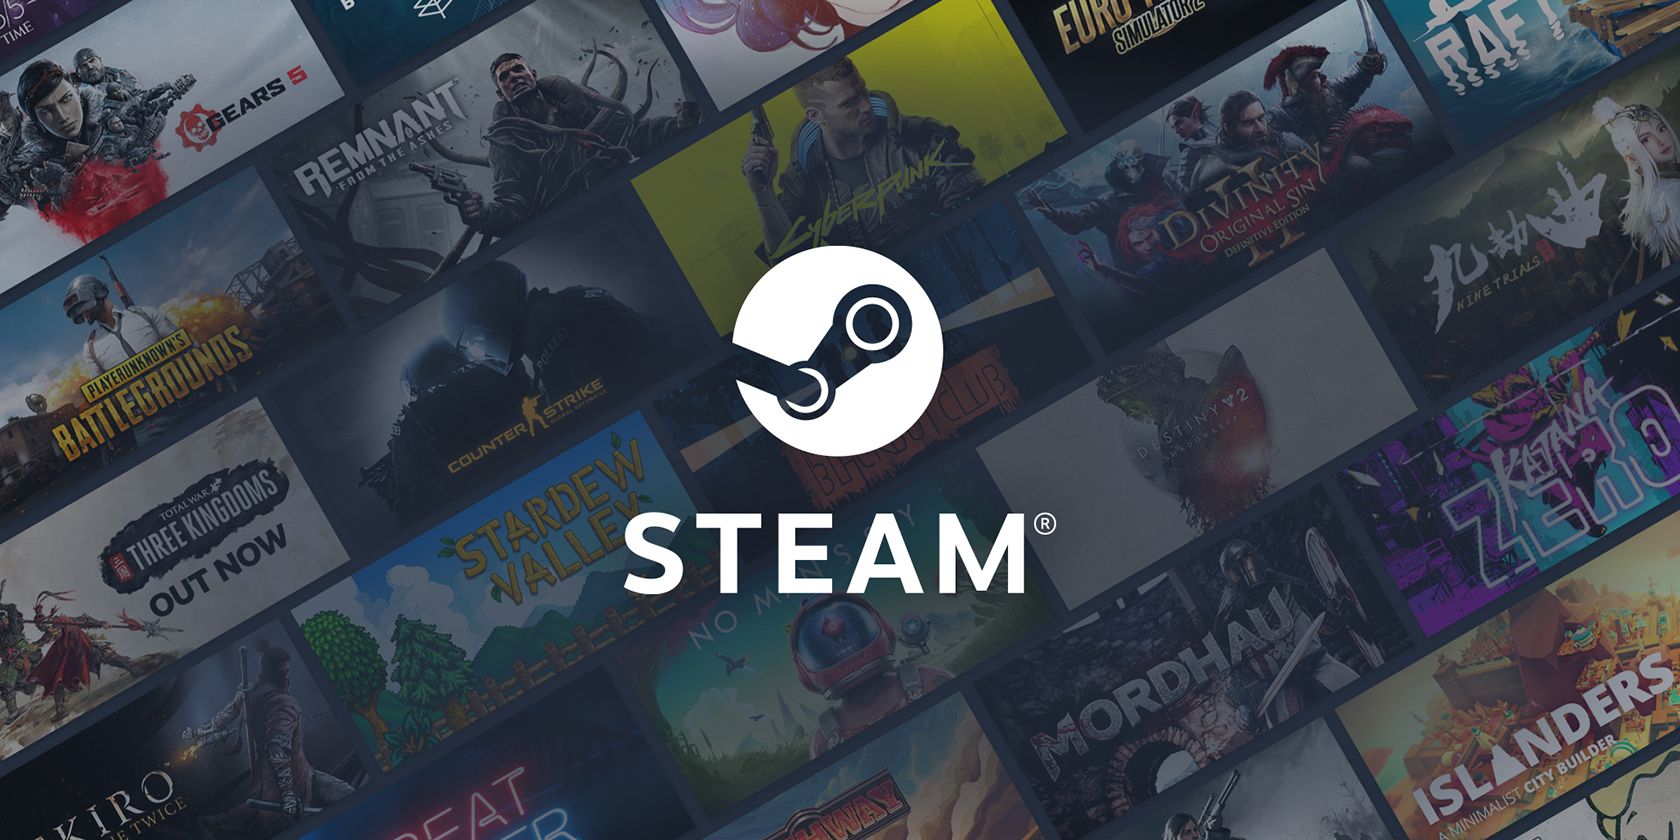 Steam and some of the video games hosted on it.